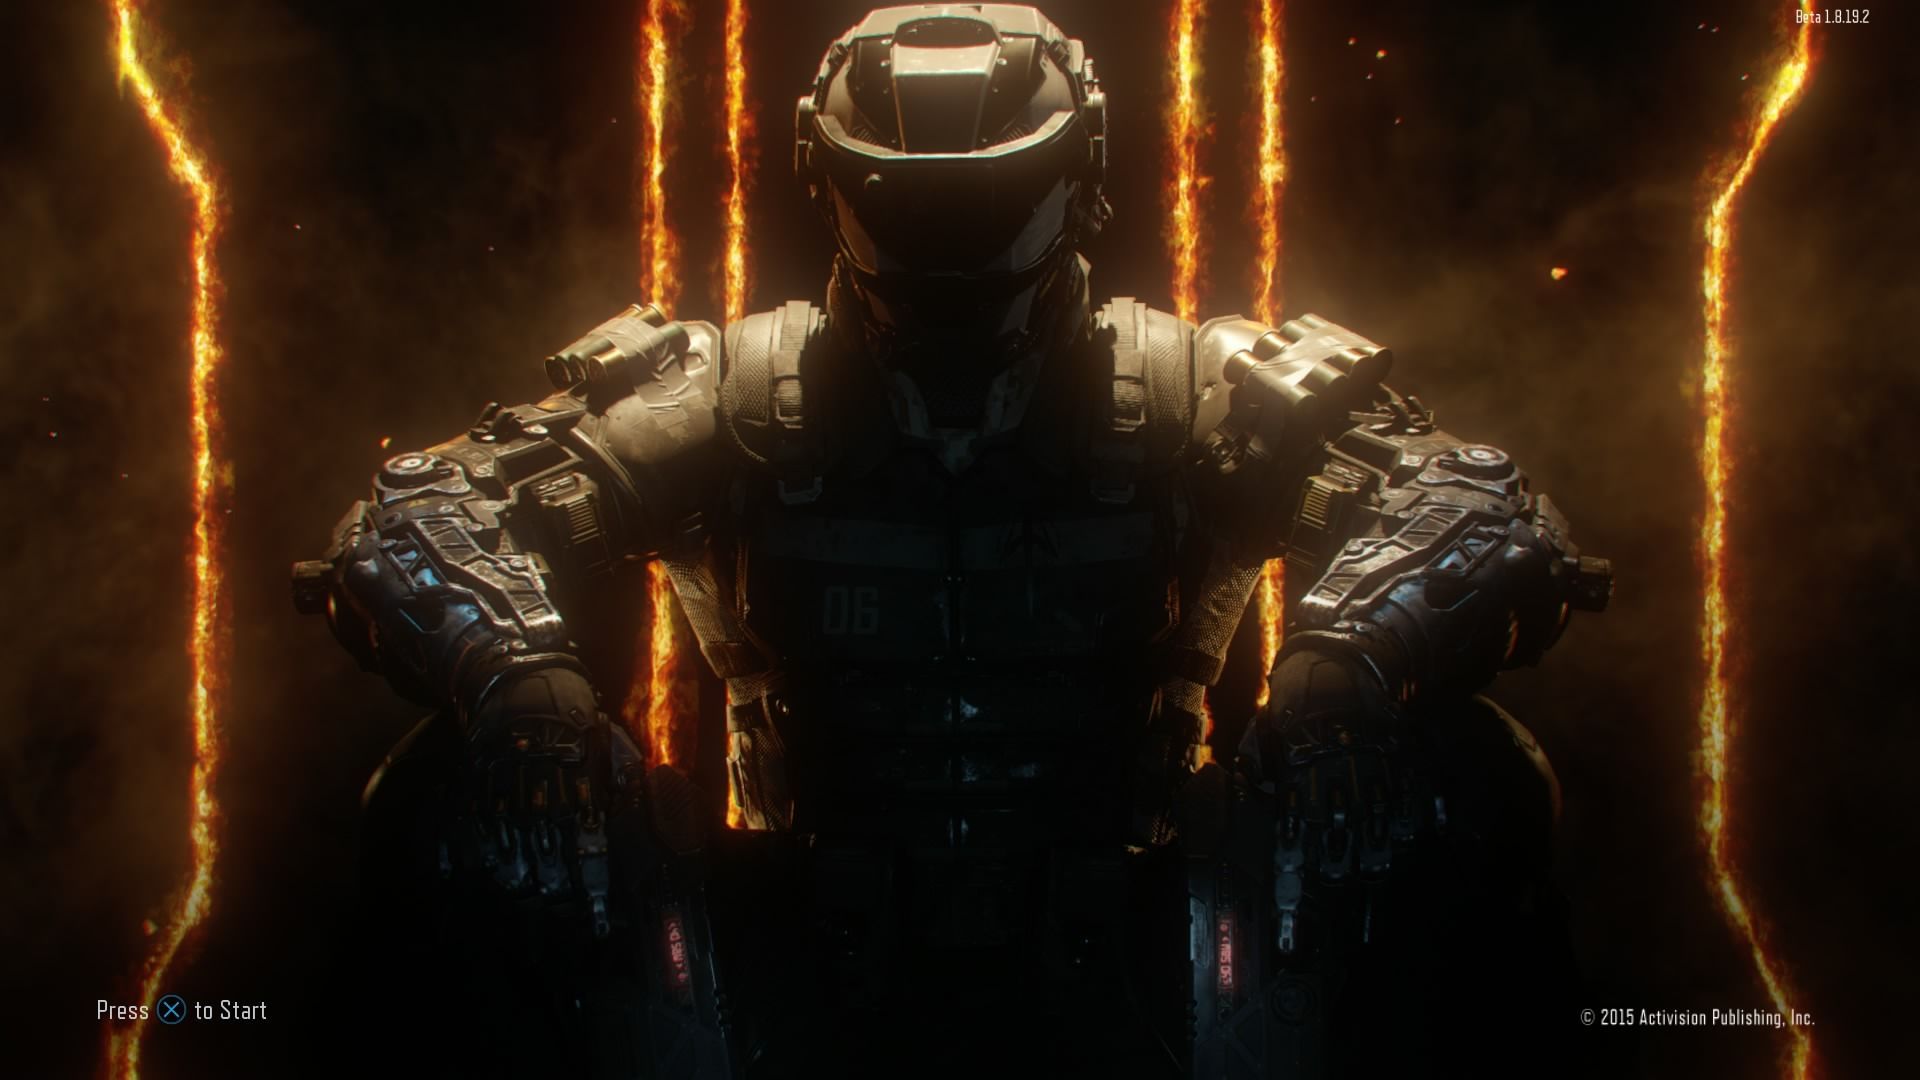 Great Call of Duty Black Ops III Wallpaper | Full HD Pictures